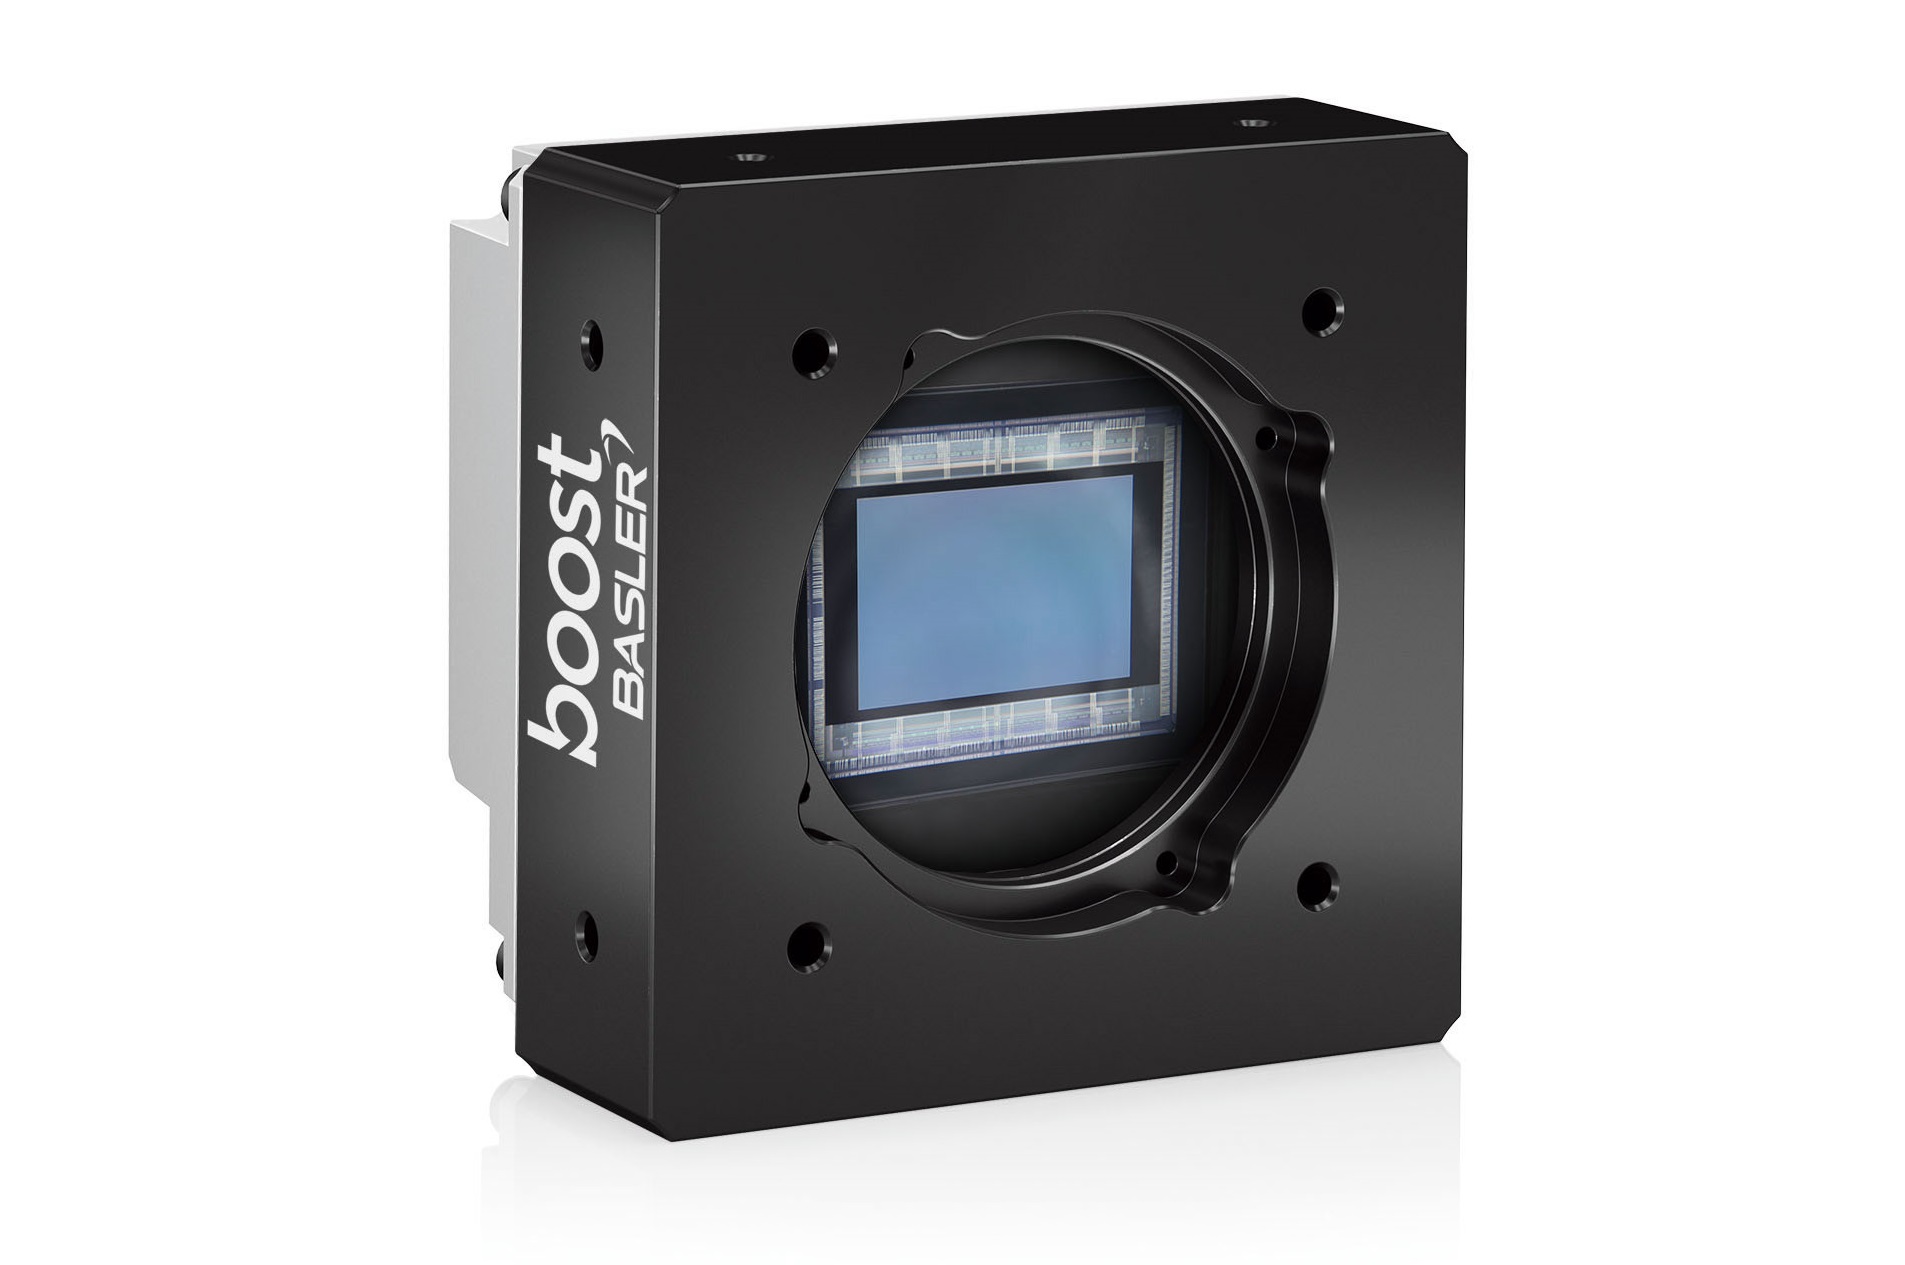 Basler boost camera with high-resolution sensors from ON Semiconductor's XGS series